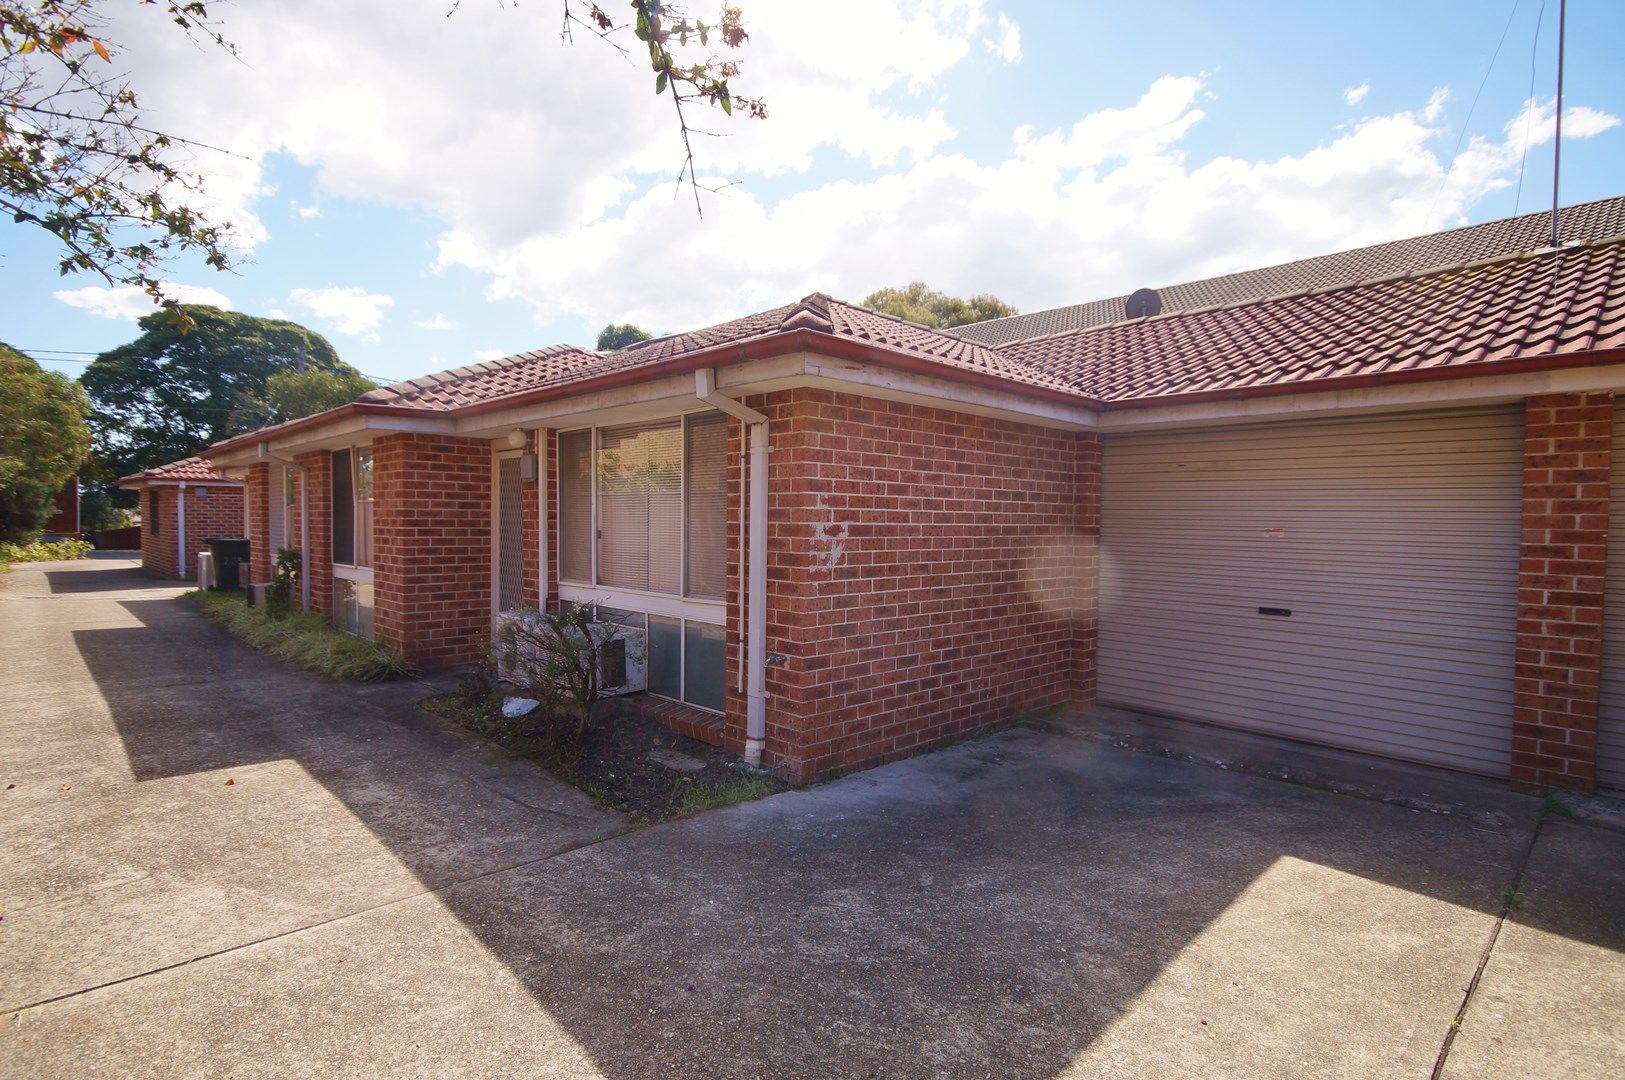 2 bedrooms Townhouse in 3/25 Macquarie Rd AUBURN NSW, 2144